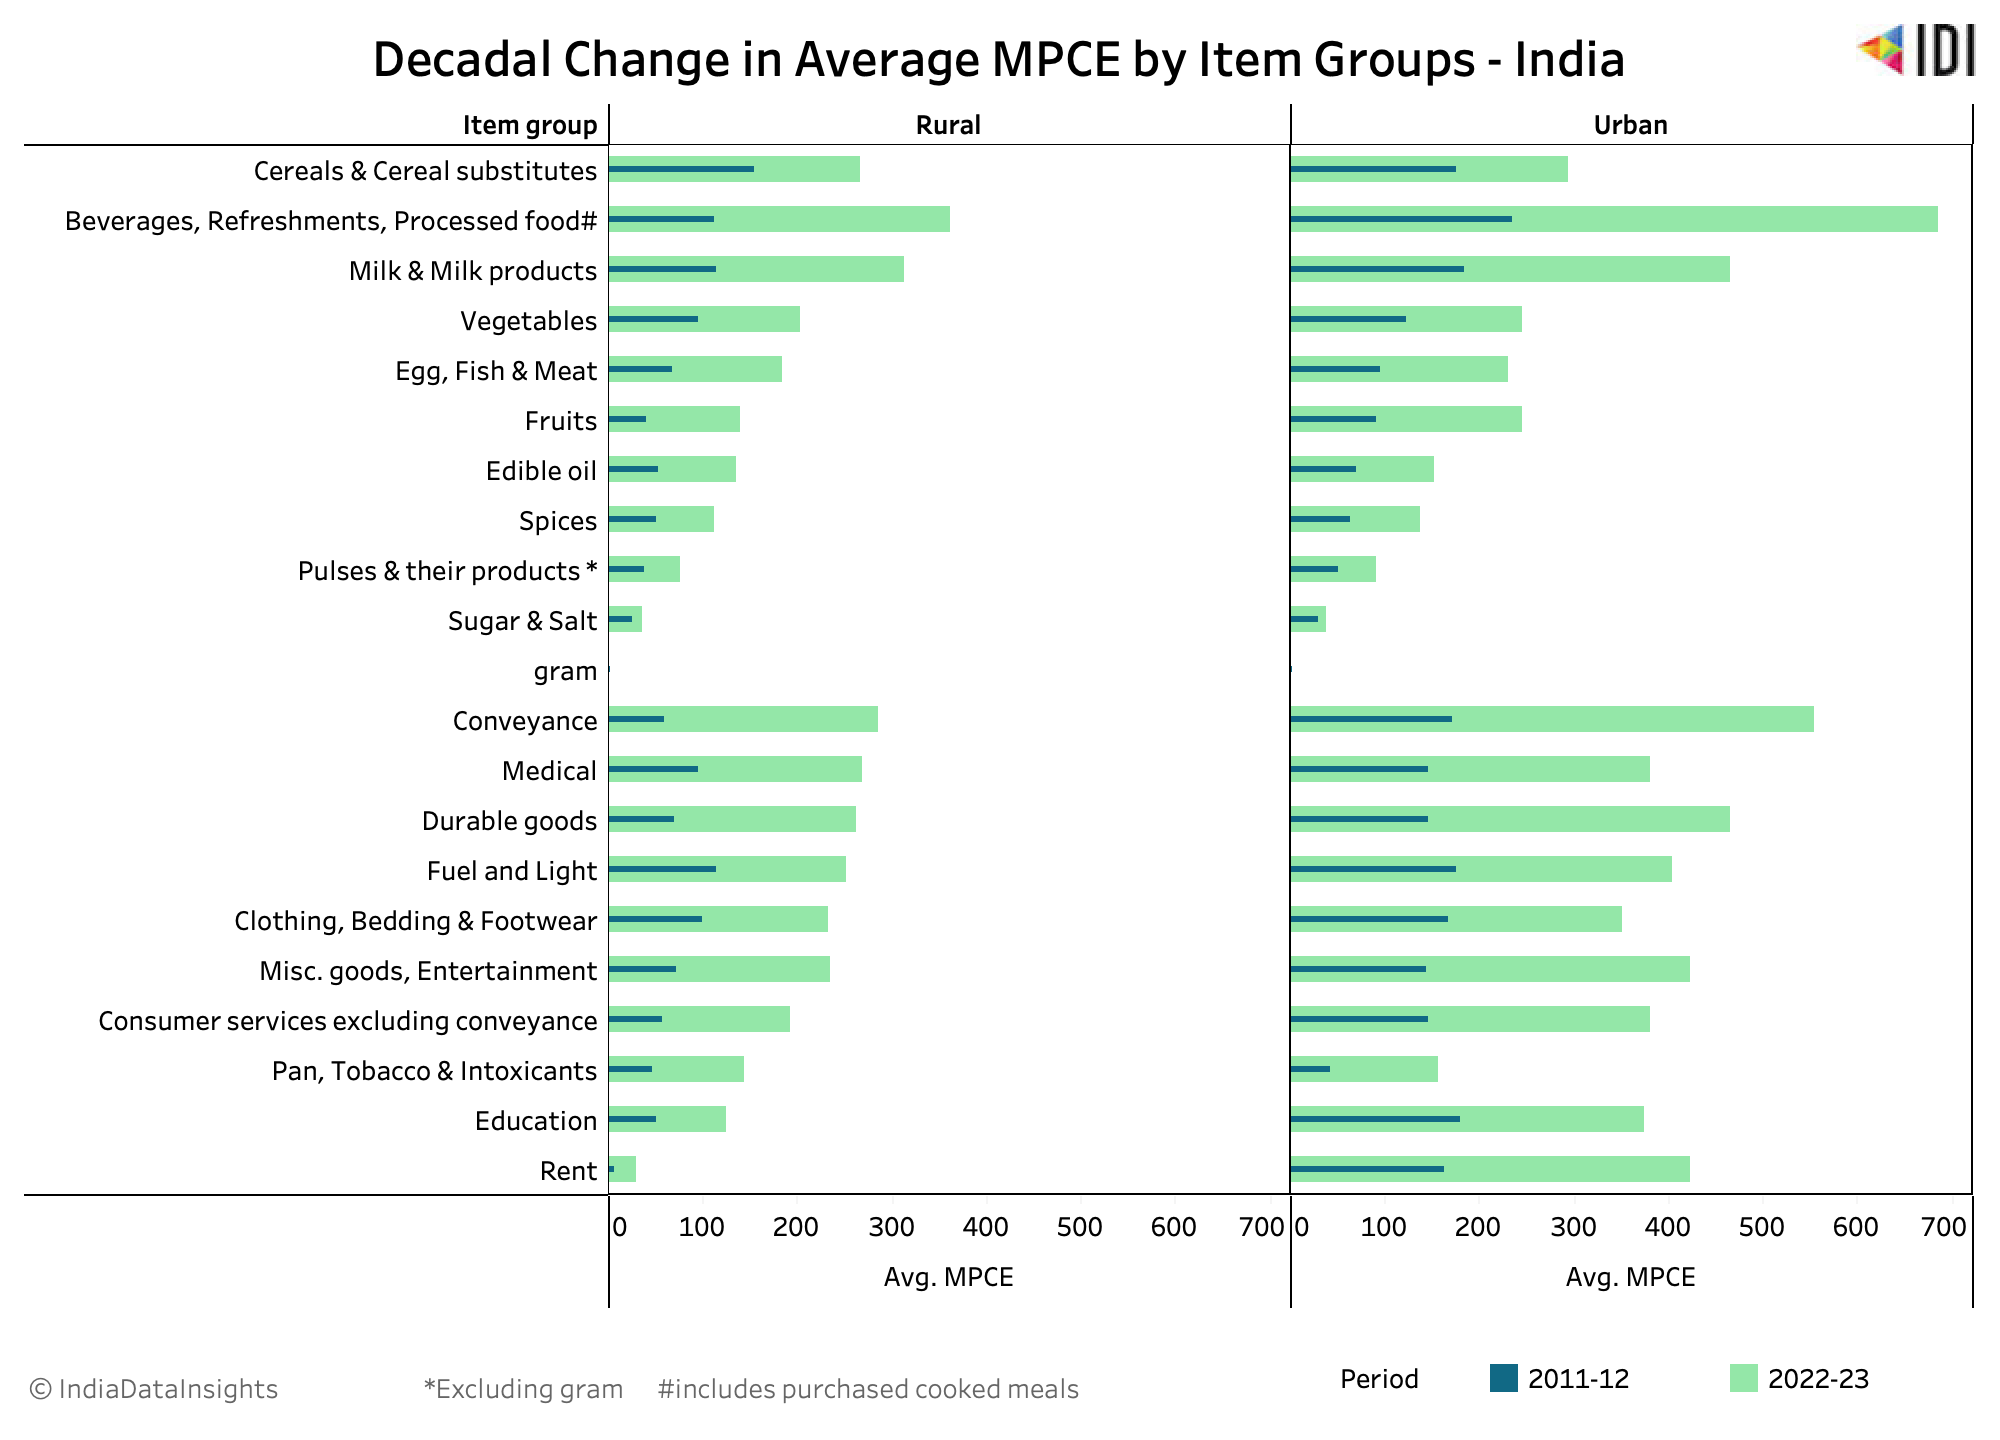 Decadal Change in MPCE across food items